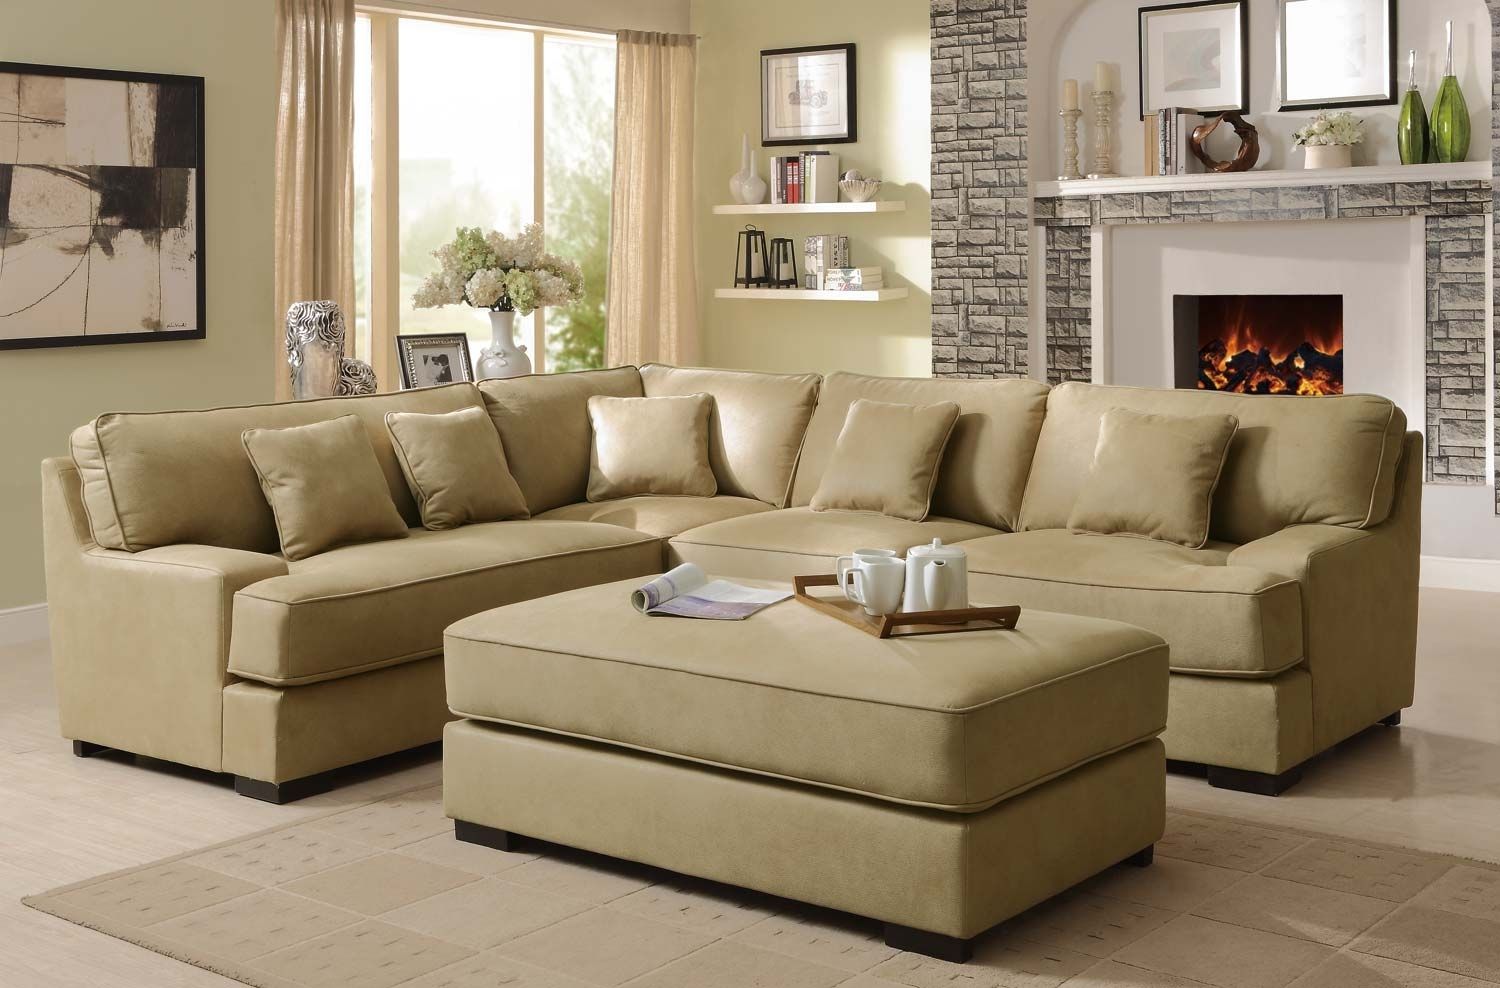 Sectional Sofa Design Amazing Beige Sectional Sofas Beige Leather Throughout Beige Sectional Sofas 